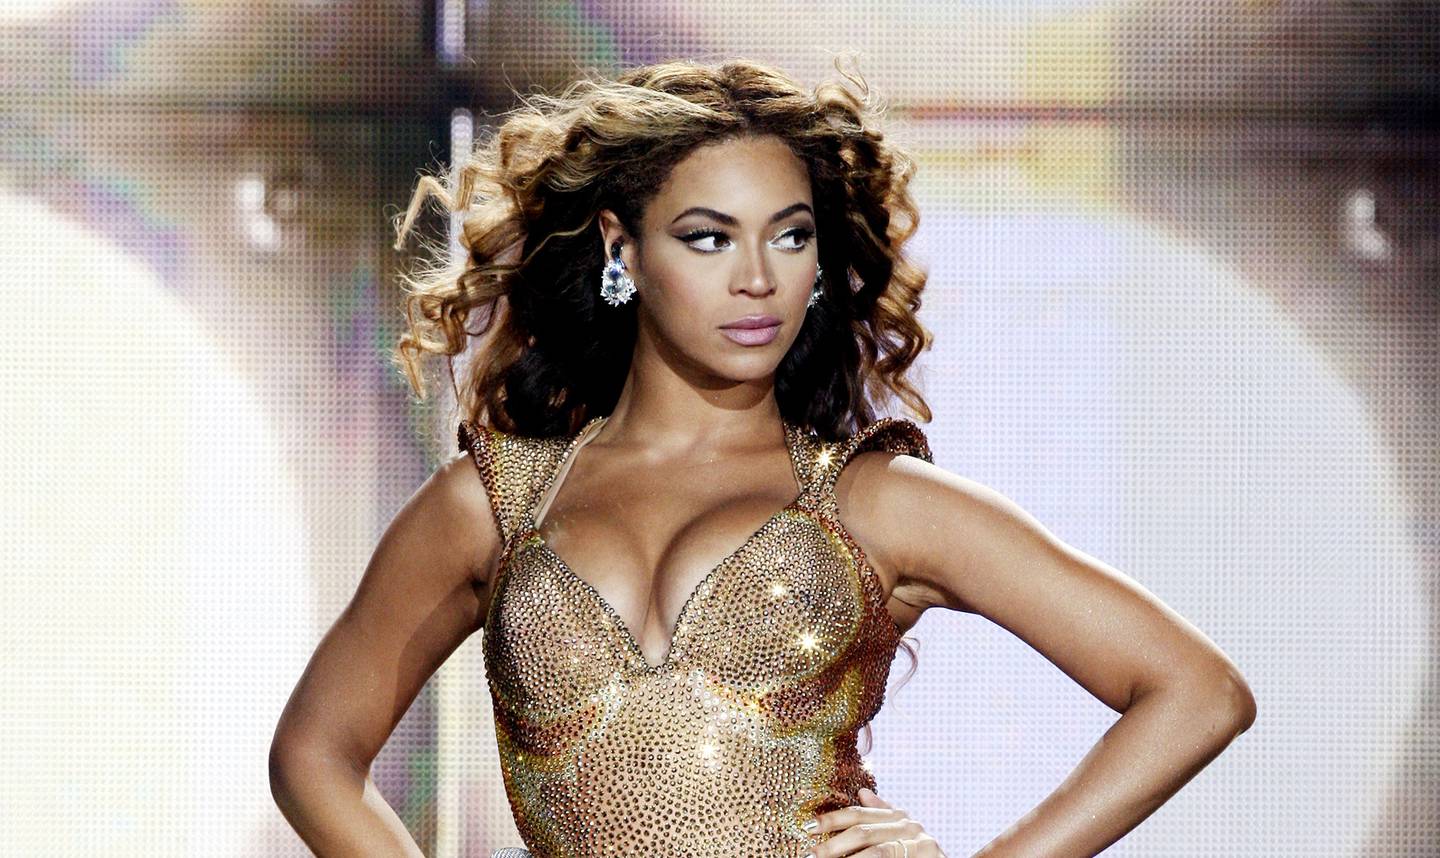 Beyonce Performs at The Staples Center in Los Angeles.